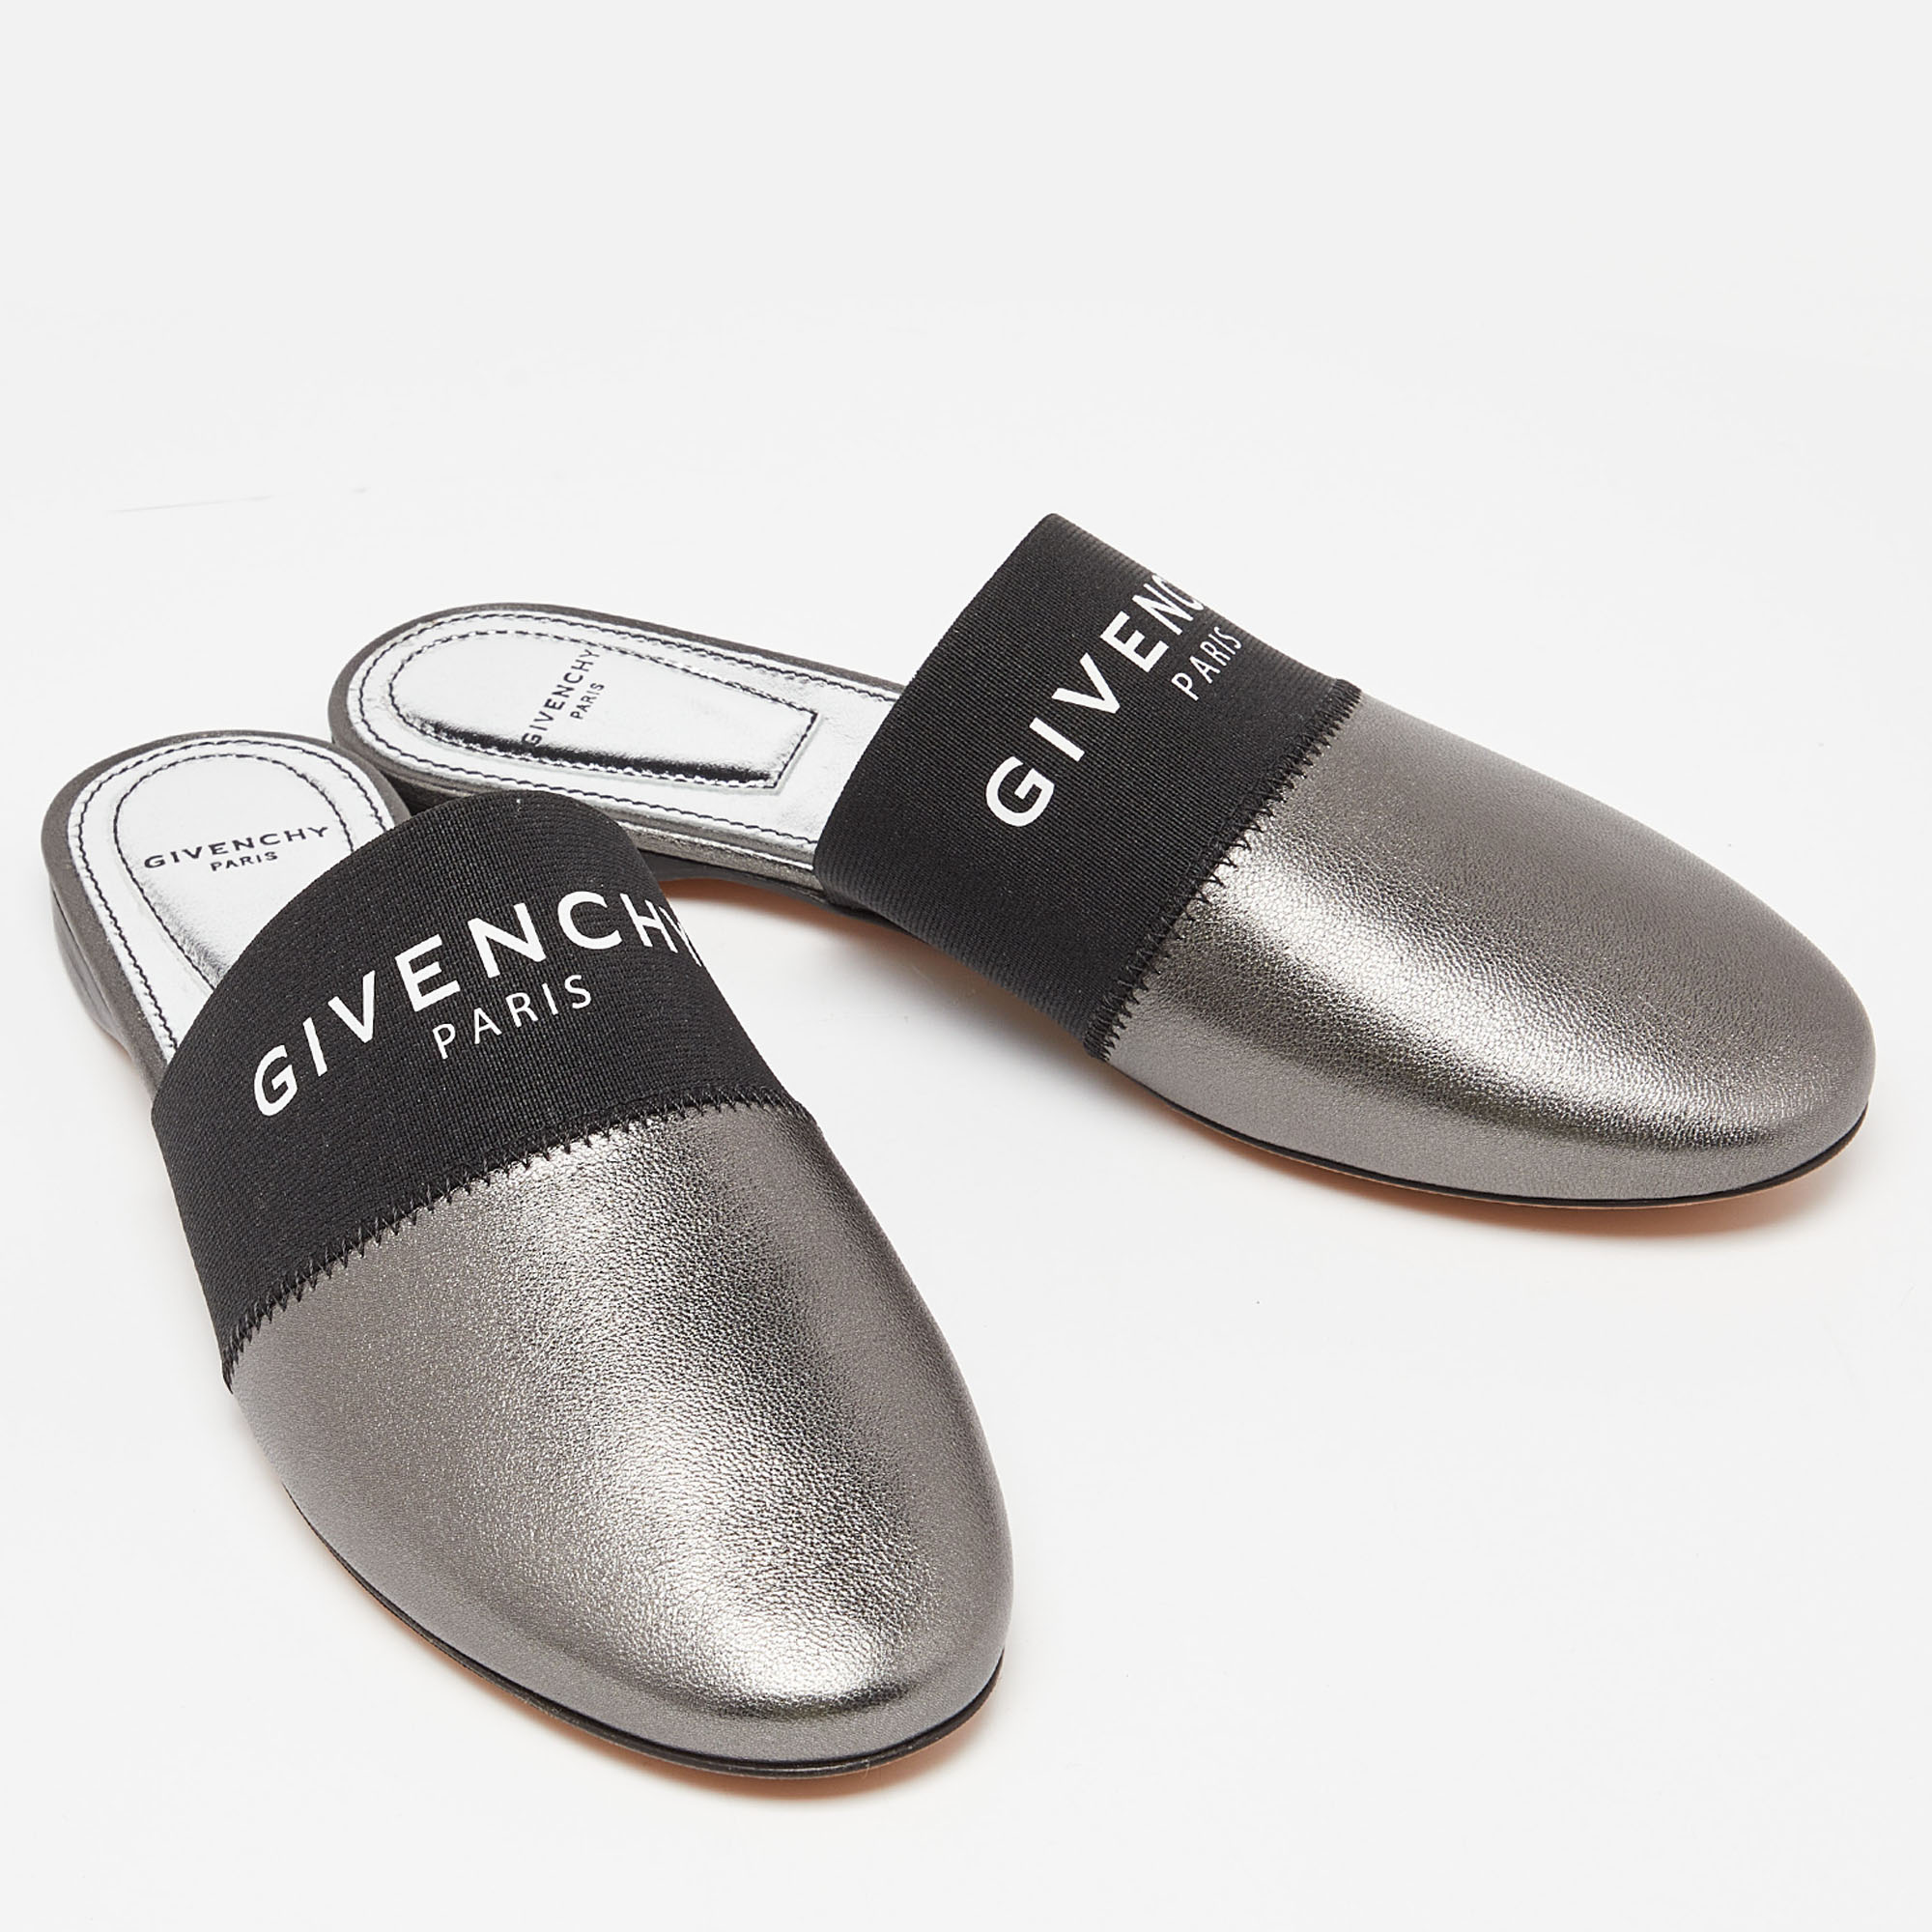 Givenchy Metallic Grey Leather Bedford Flat Mules Size 36